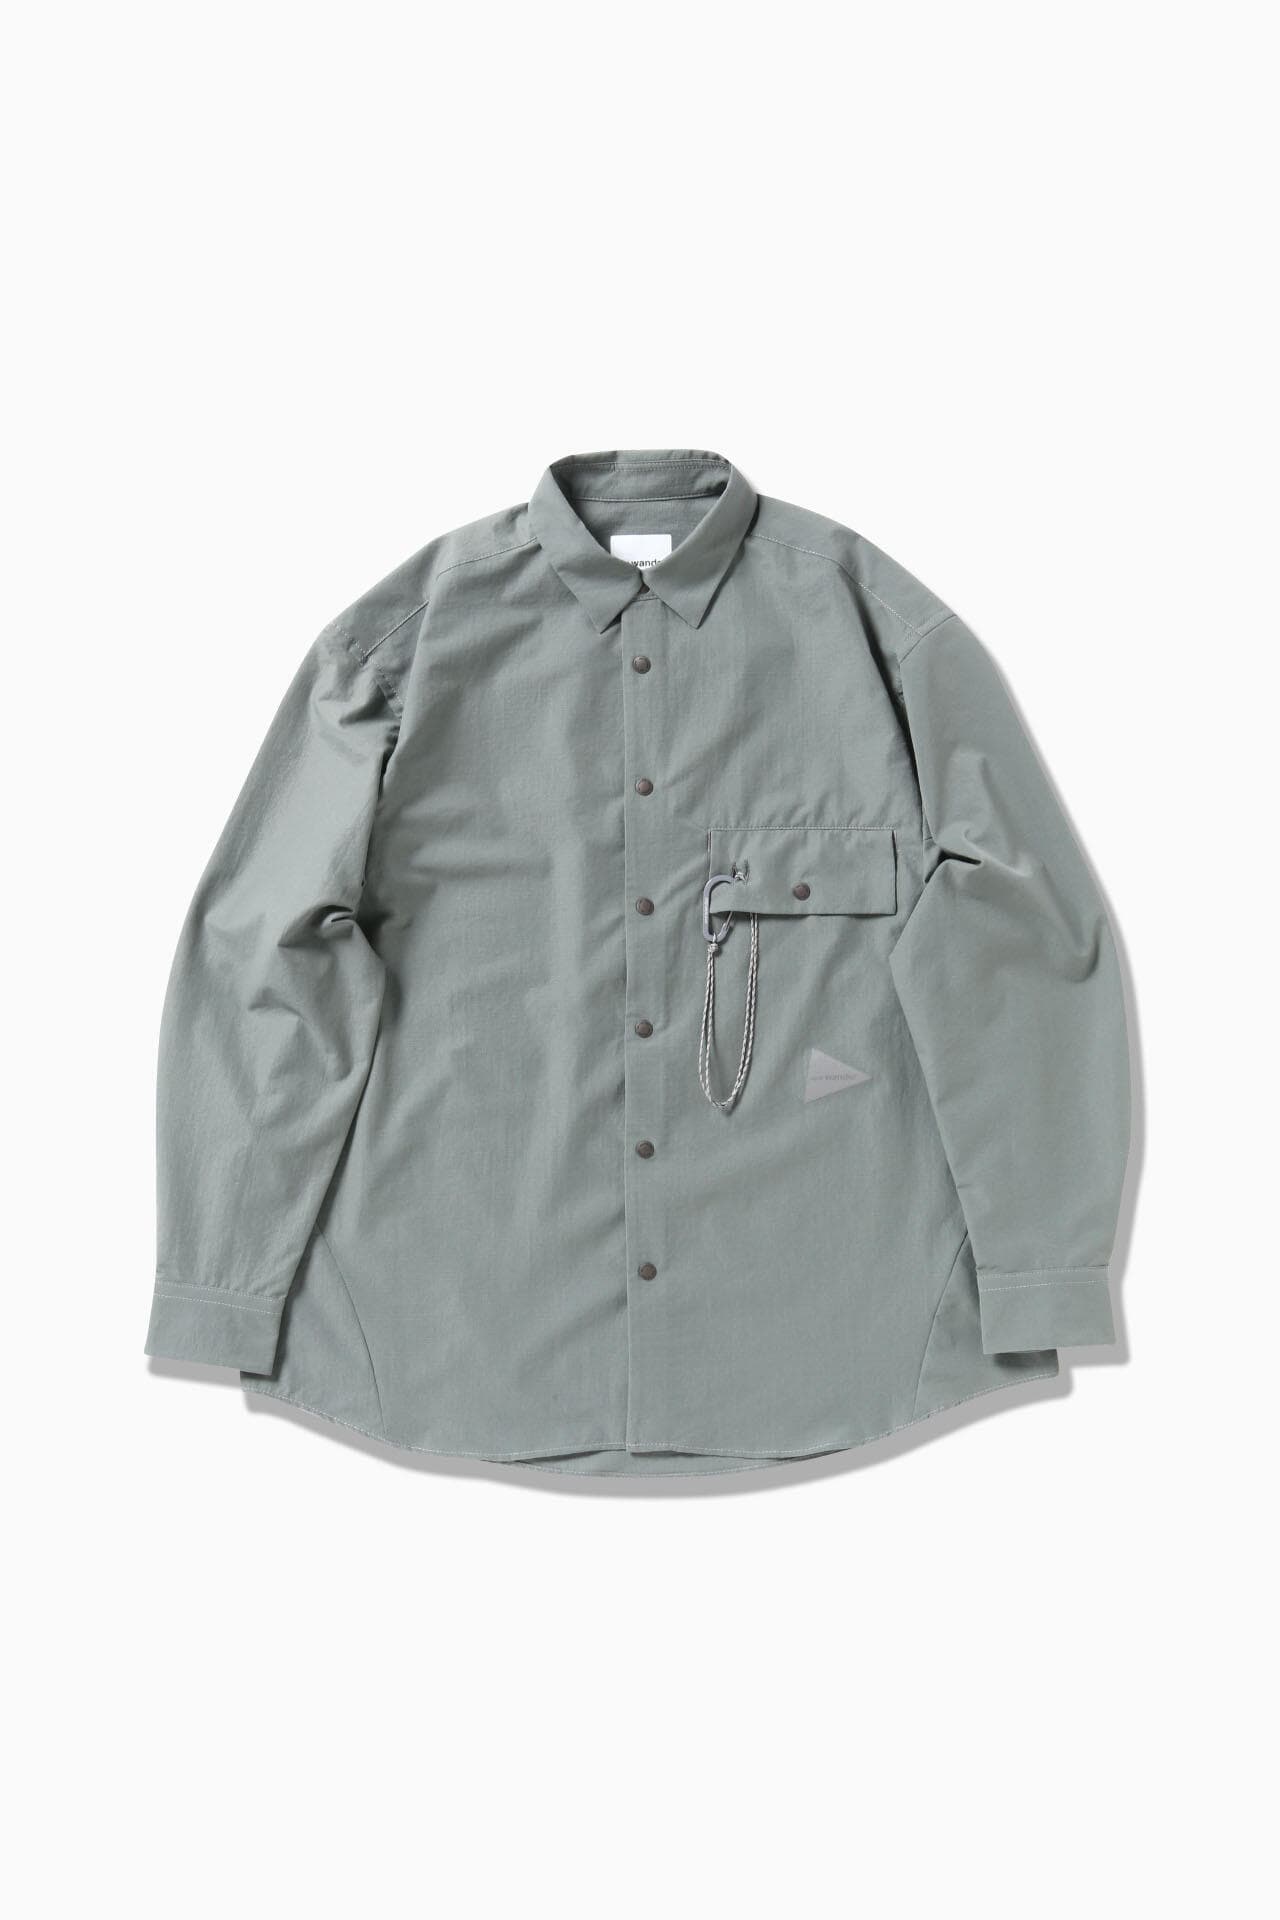 dry breathable LS shirt